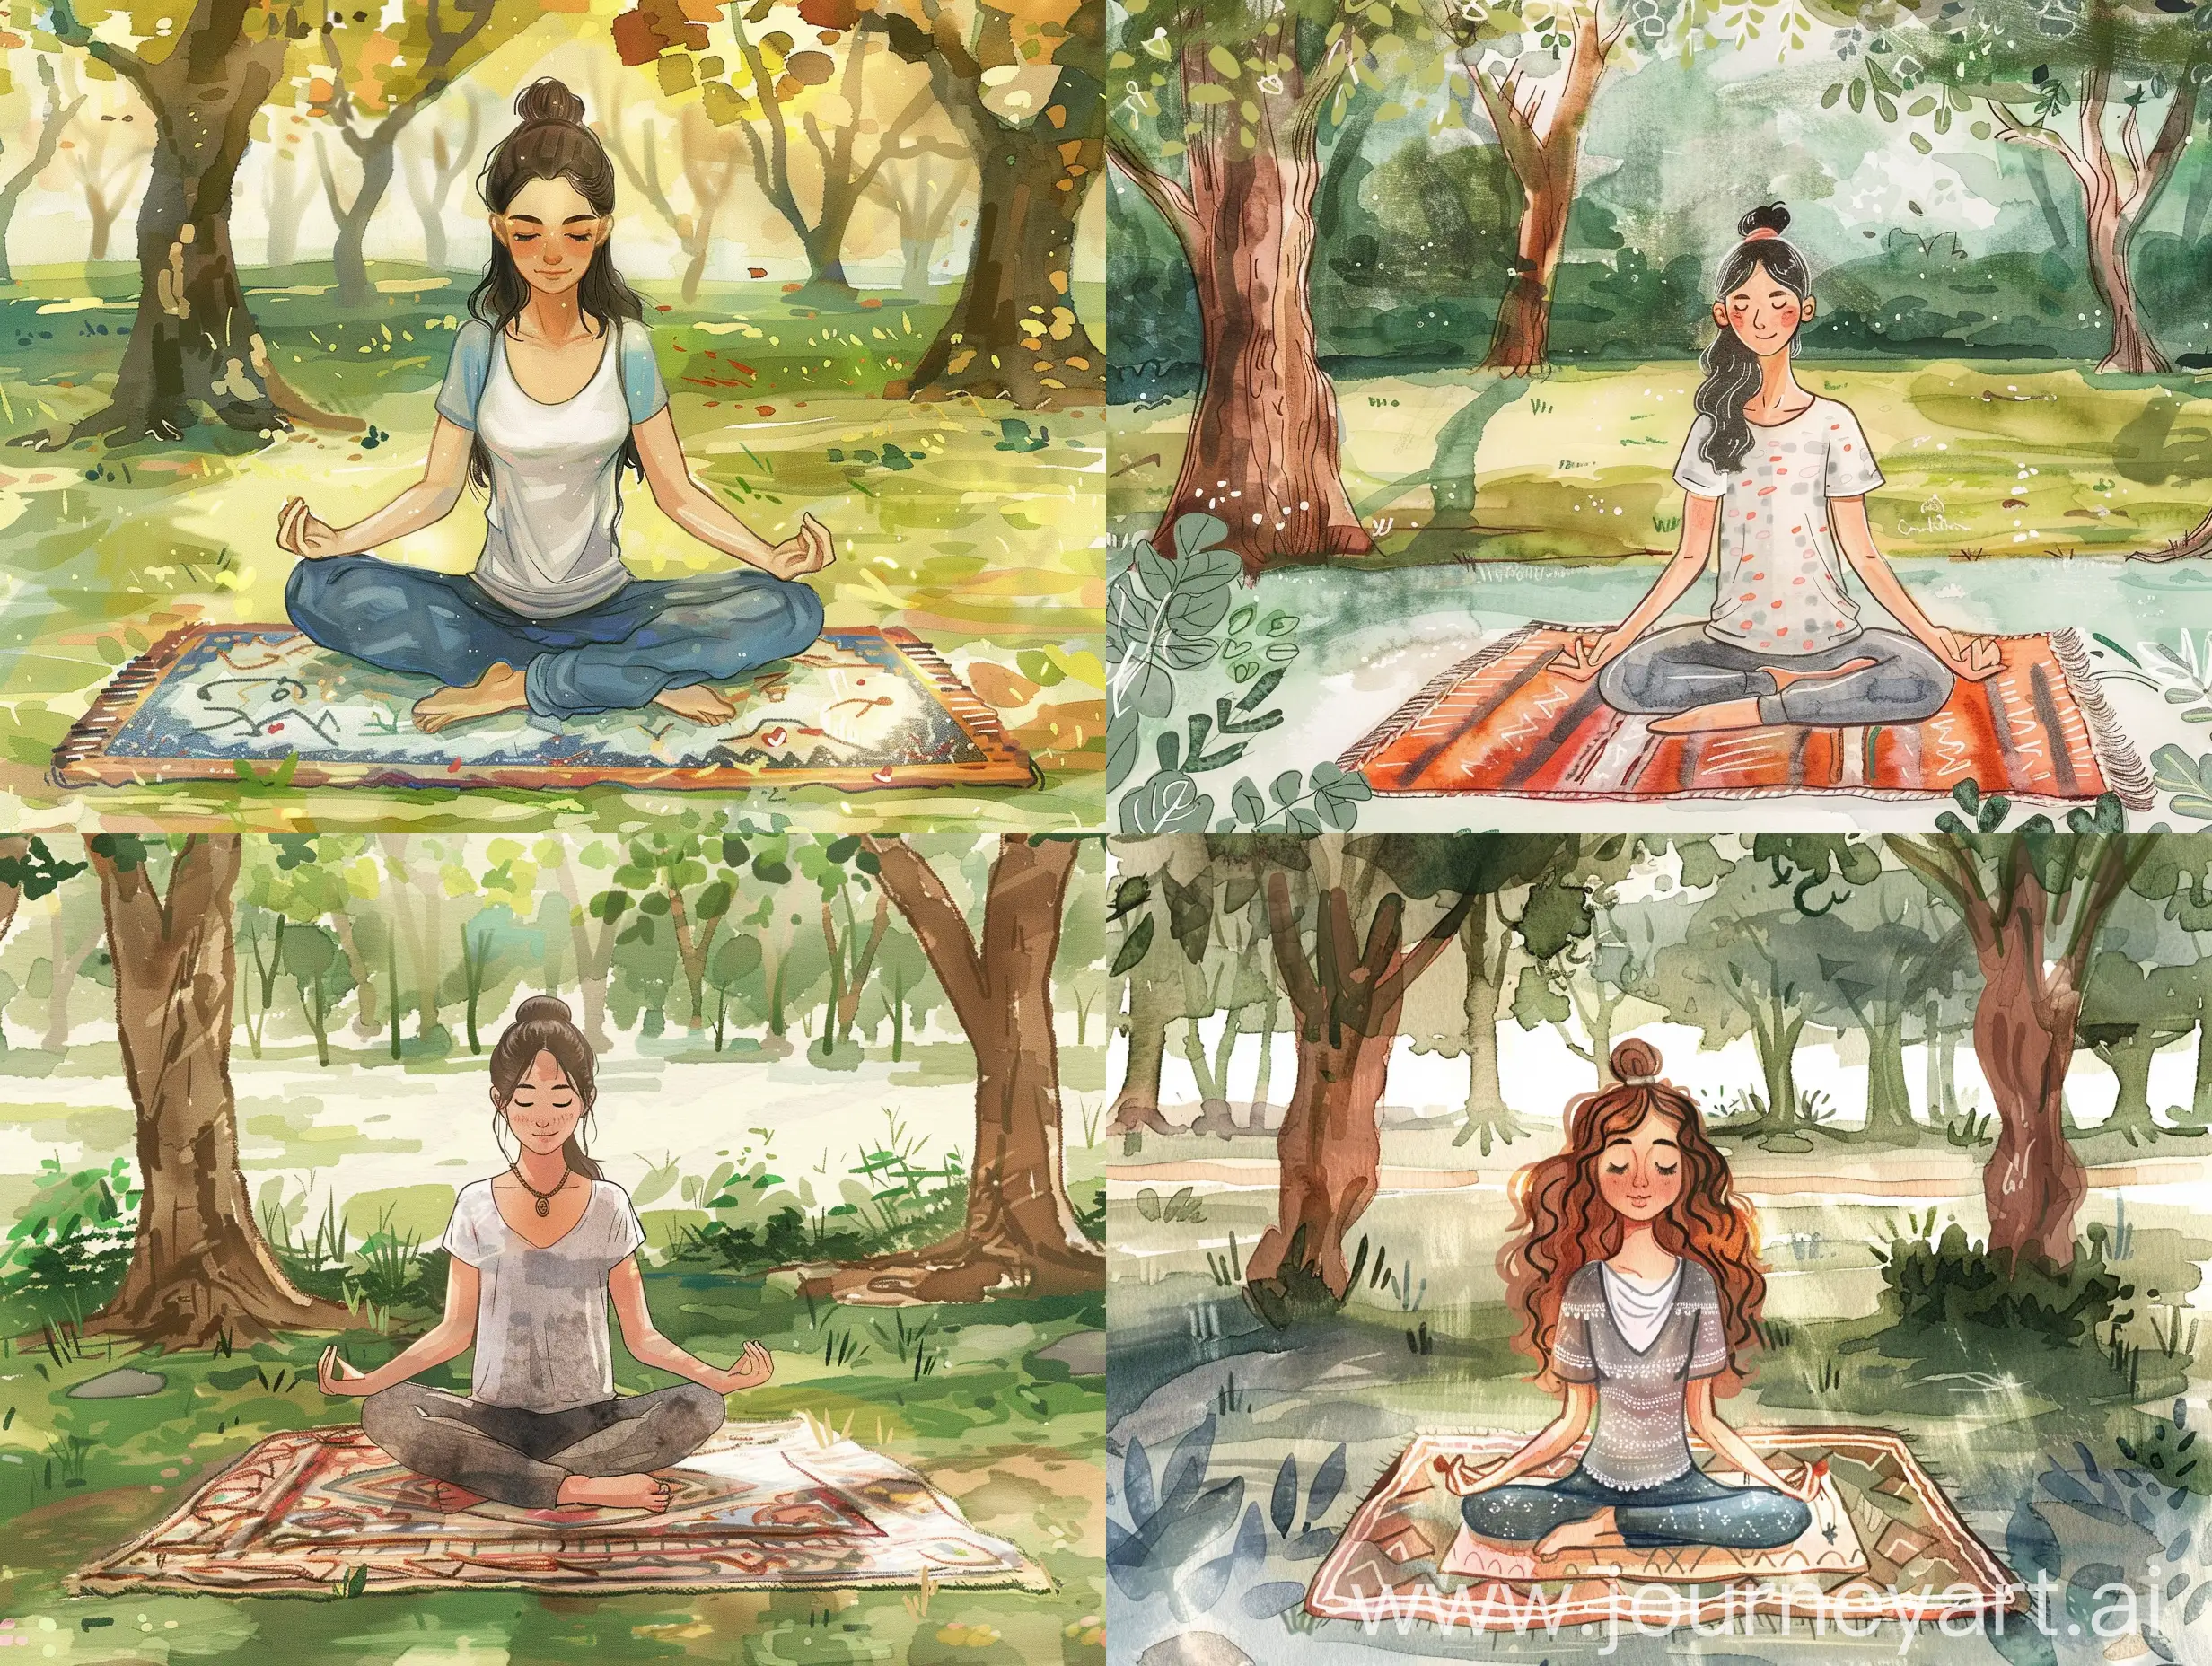 draw a yogi girl sitting in a lotus position, on a rug, in a clearing in the park